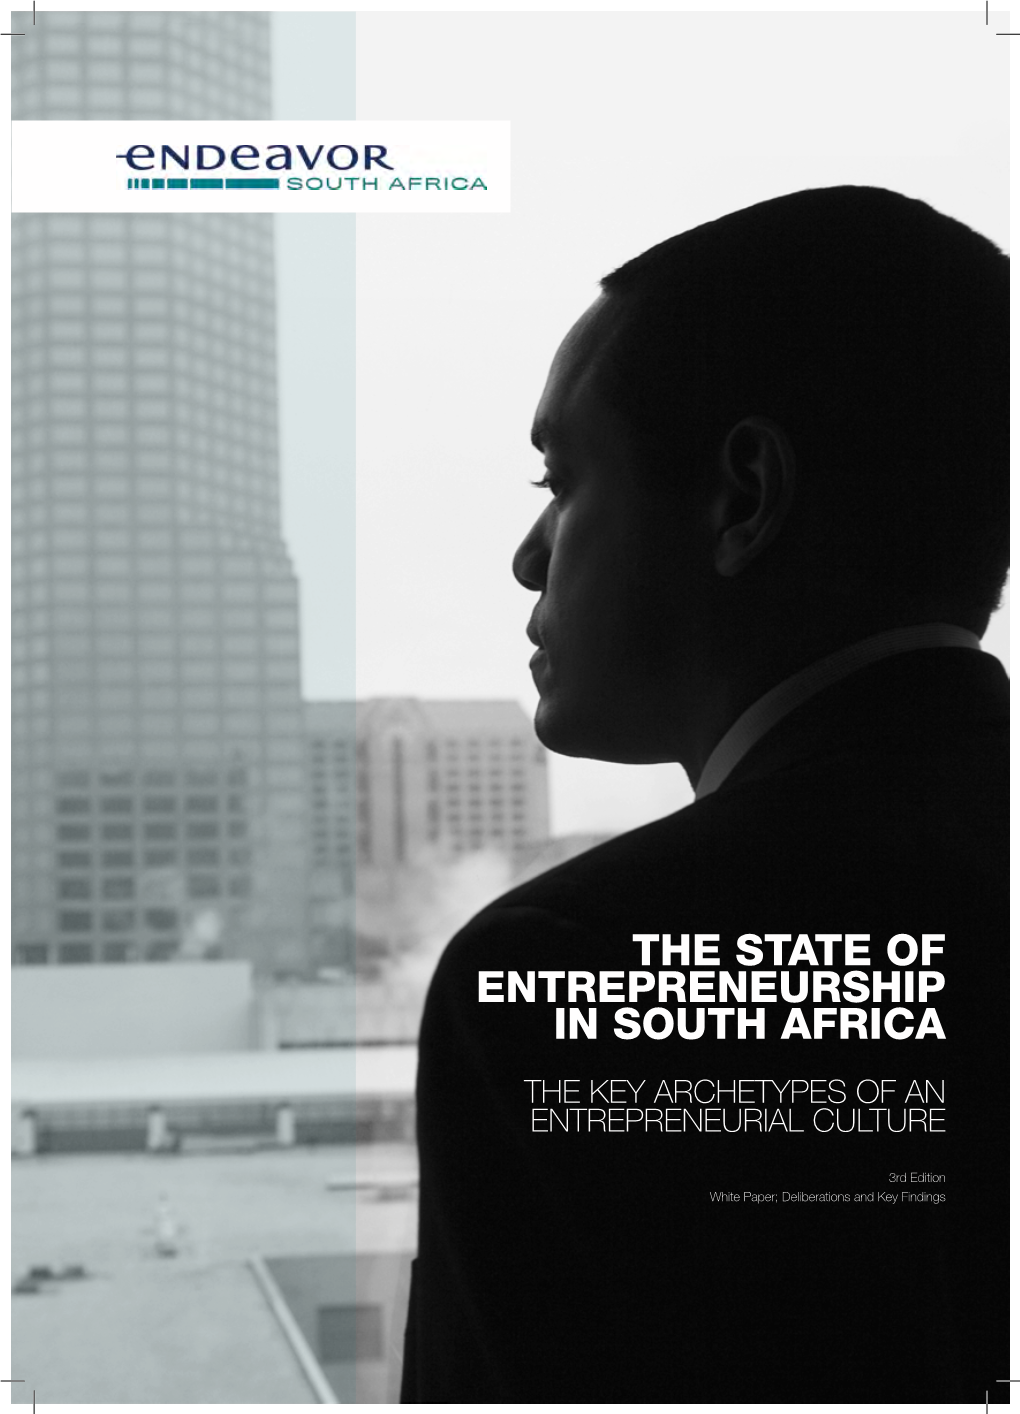 The State of Entrepreneurship in South Africa the Key Archetypes of an Entrepreneurial Culture